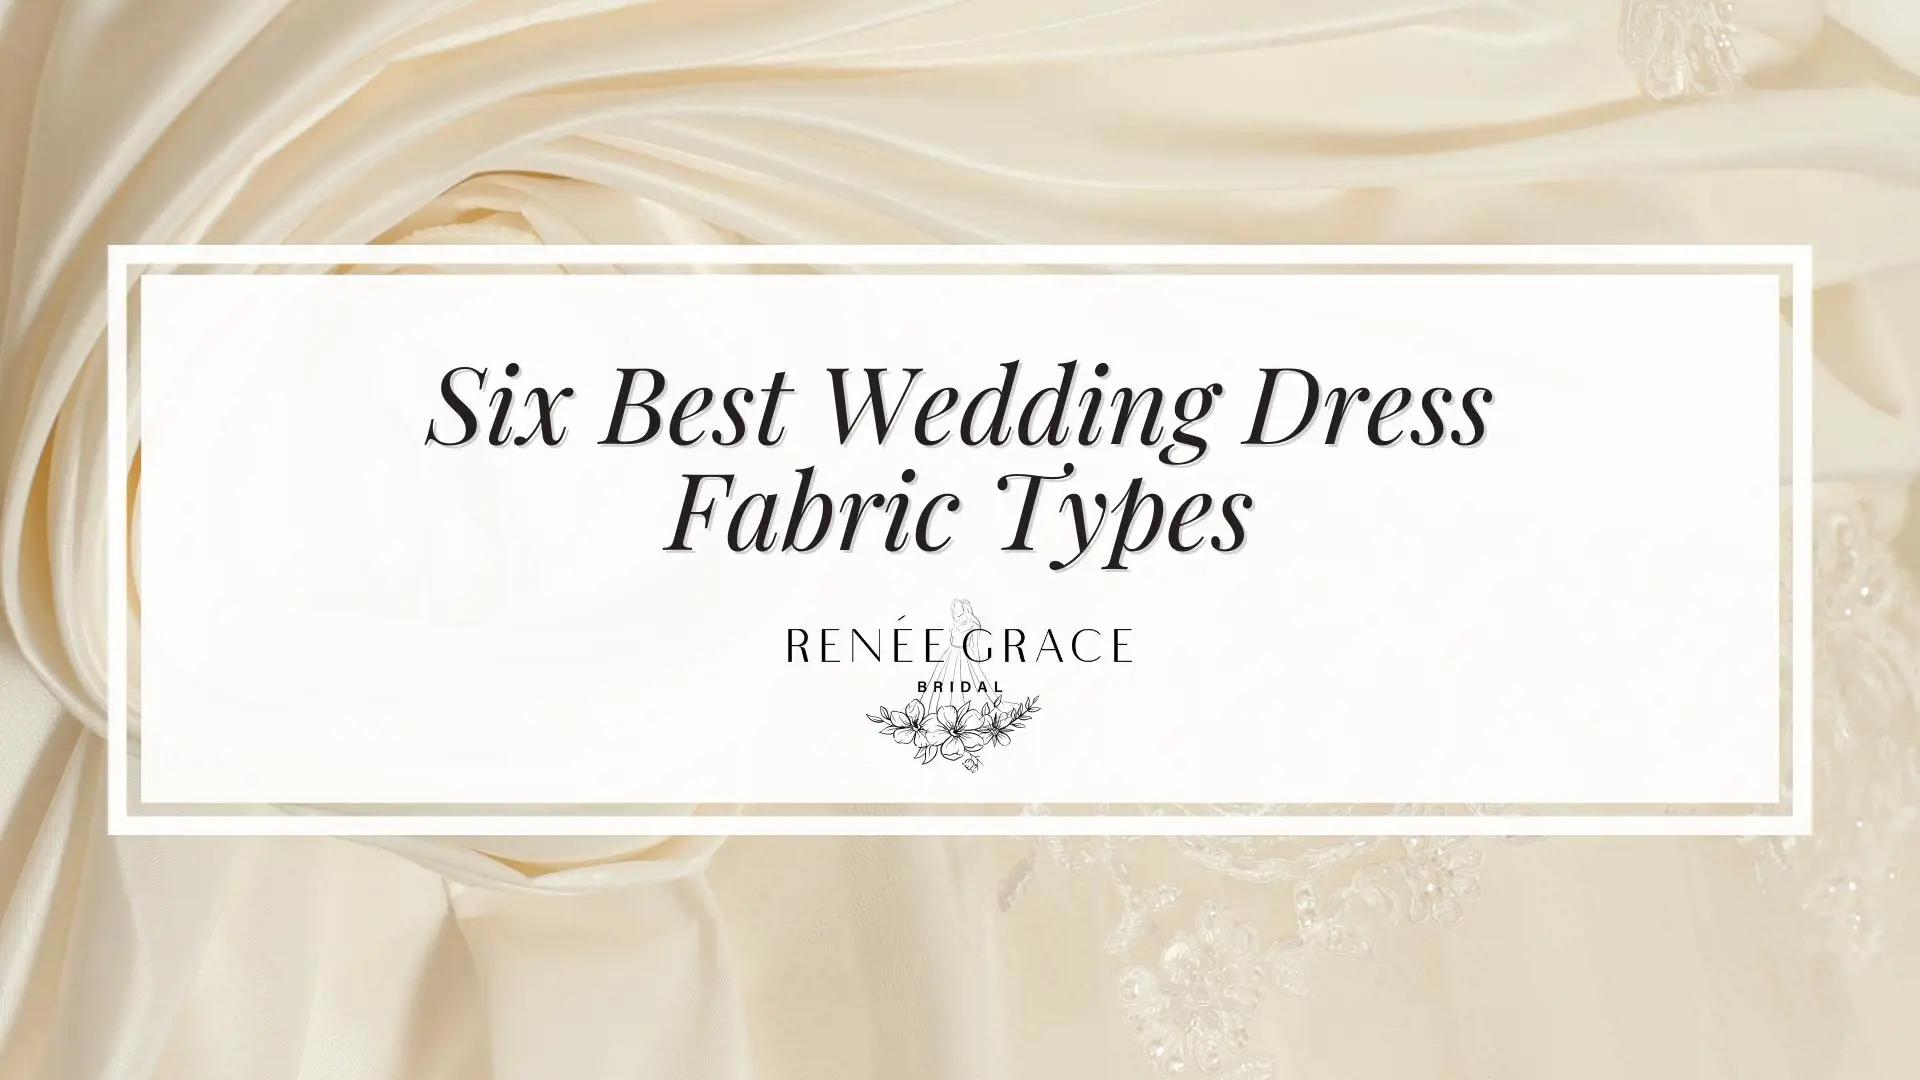 Six Best Wedding Dress Fabric Types for a Happy Bride Image